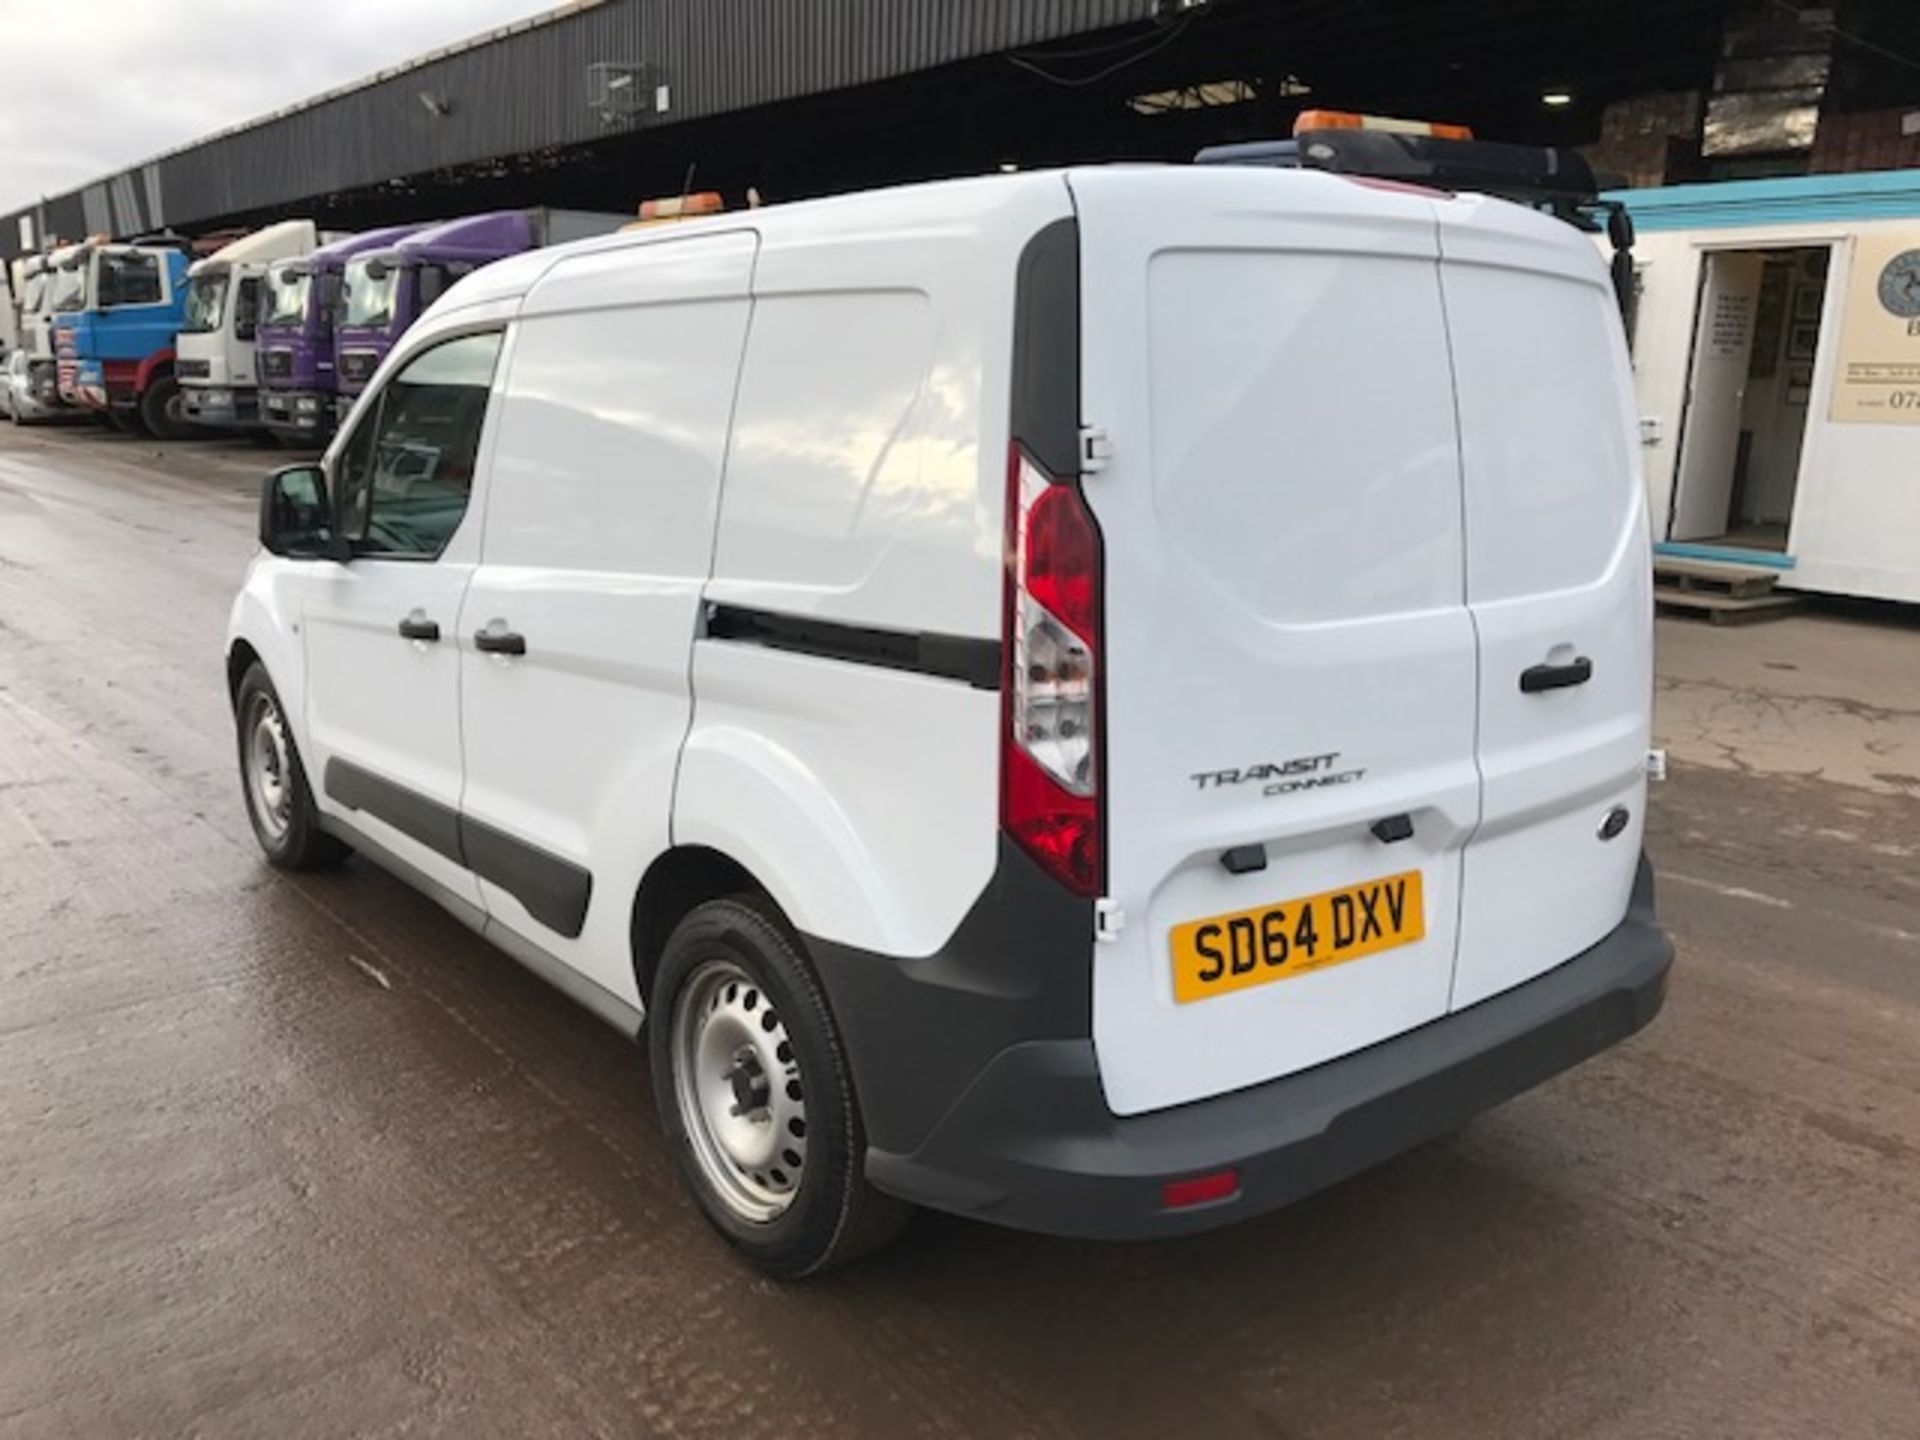 2014 Ford Transit Connect 200 van - Image 3 of 9